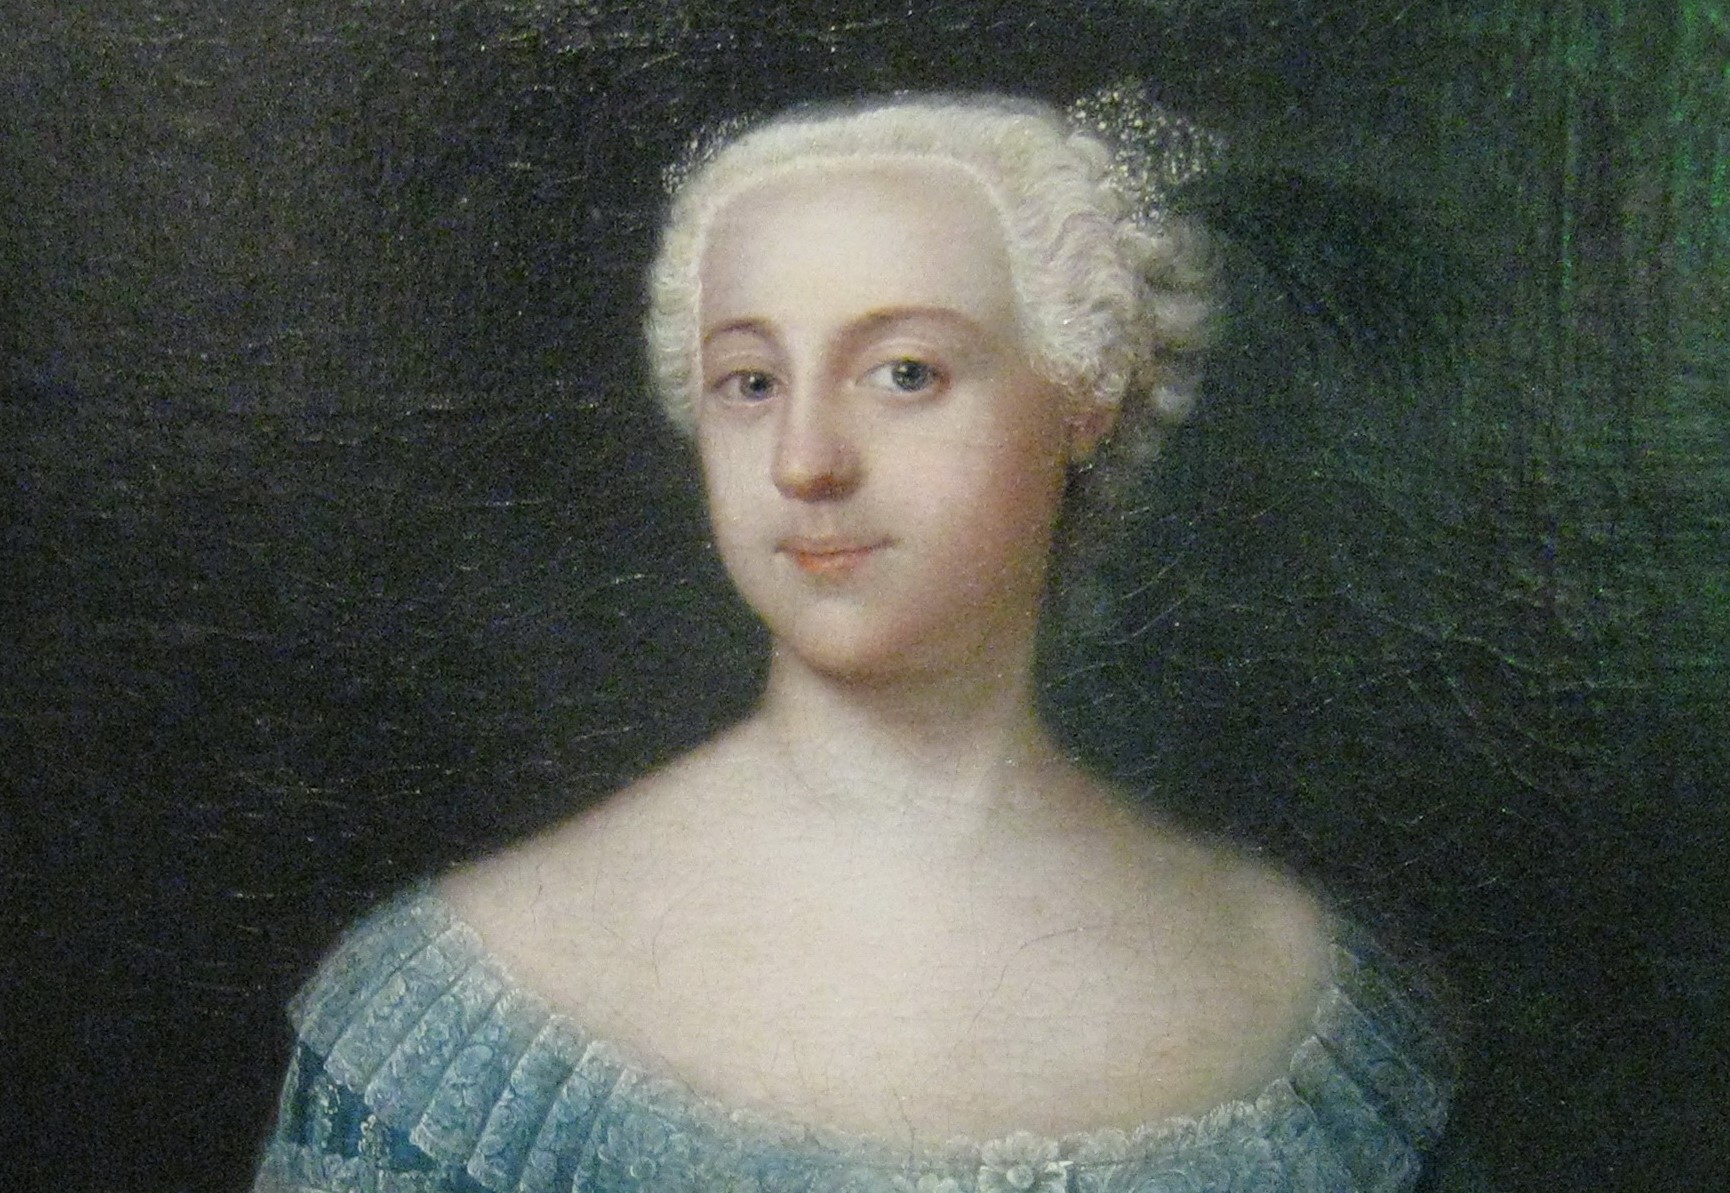 Catherine the Great - The little-known German Princess (Part one